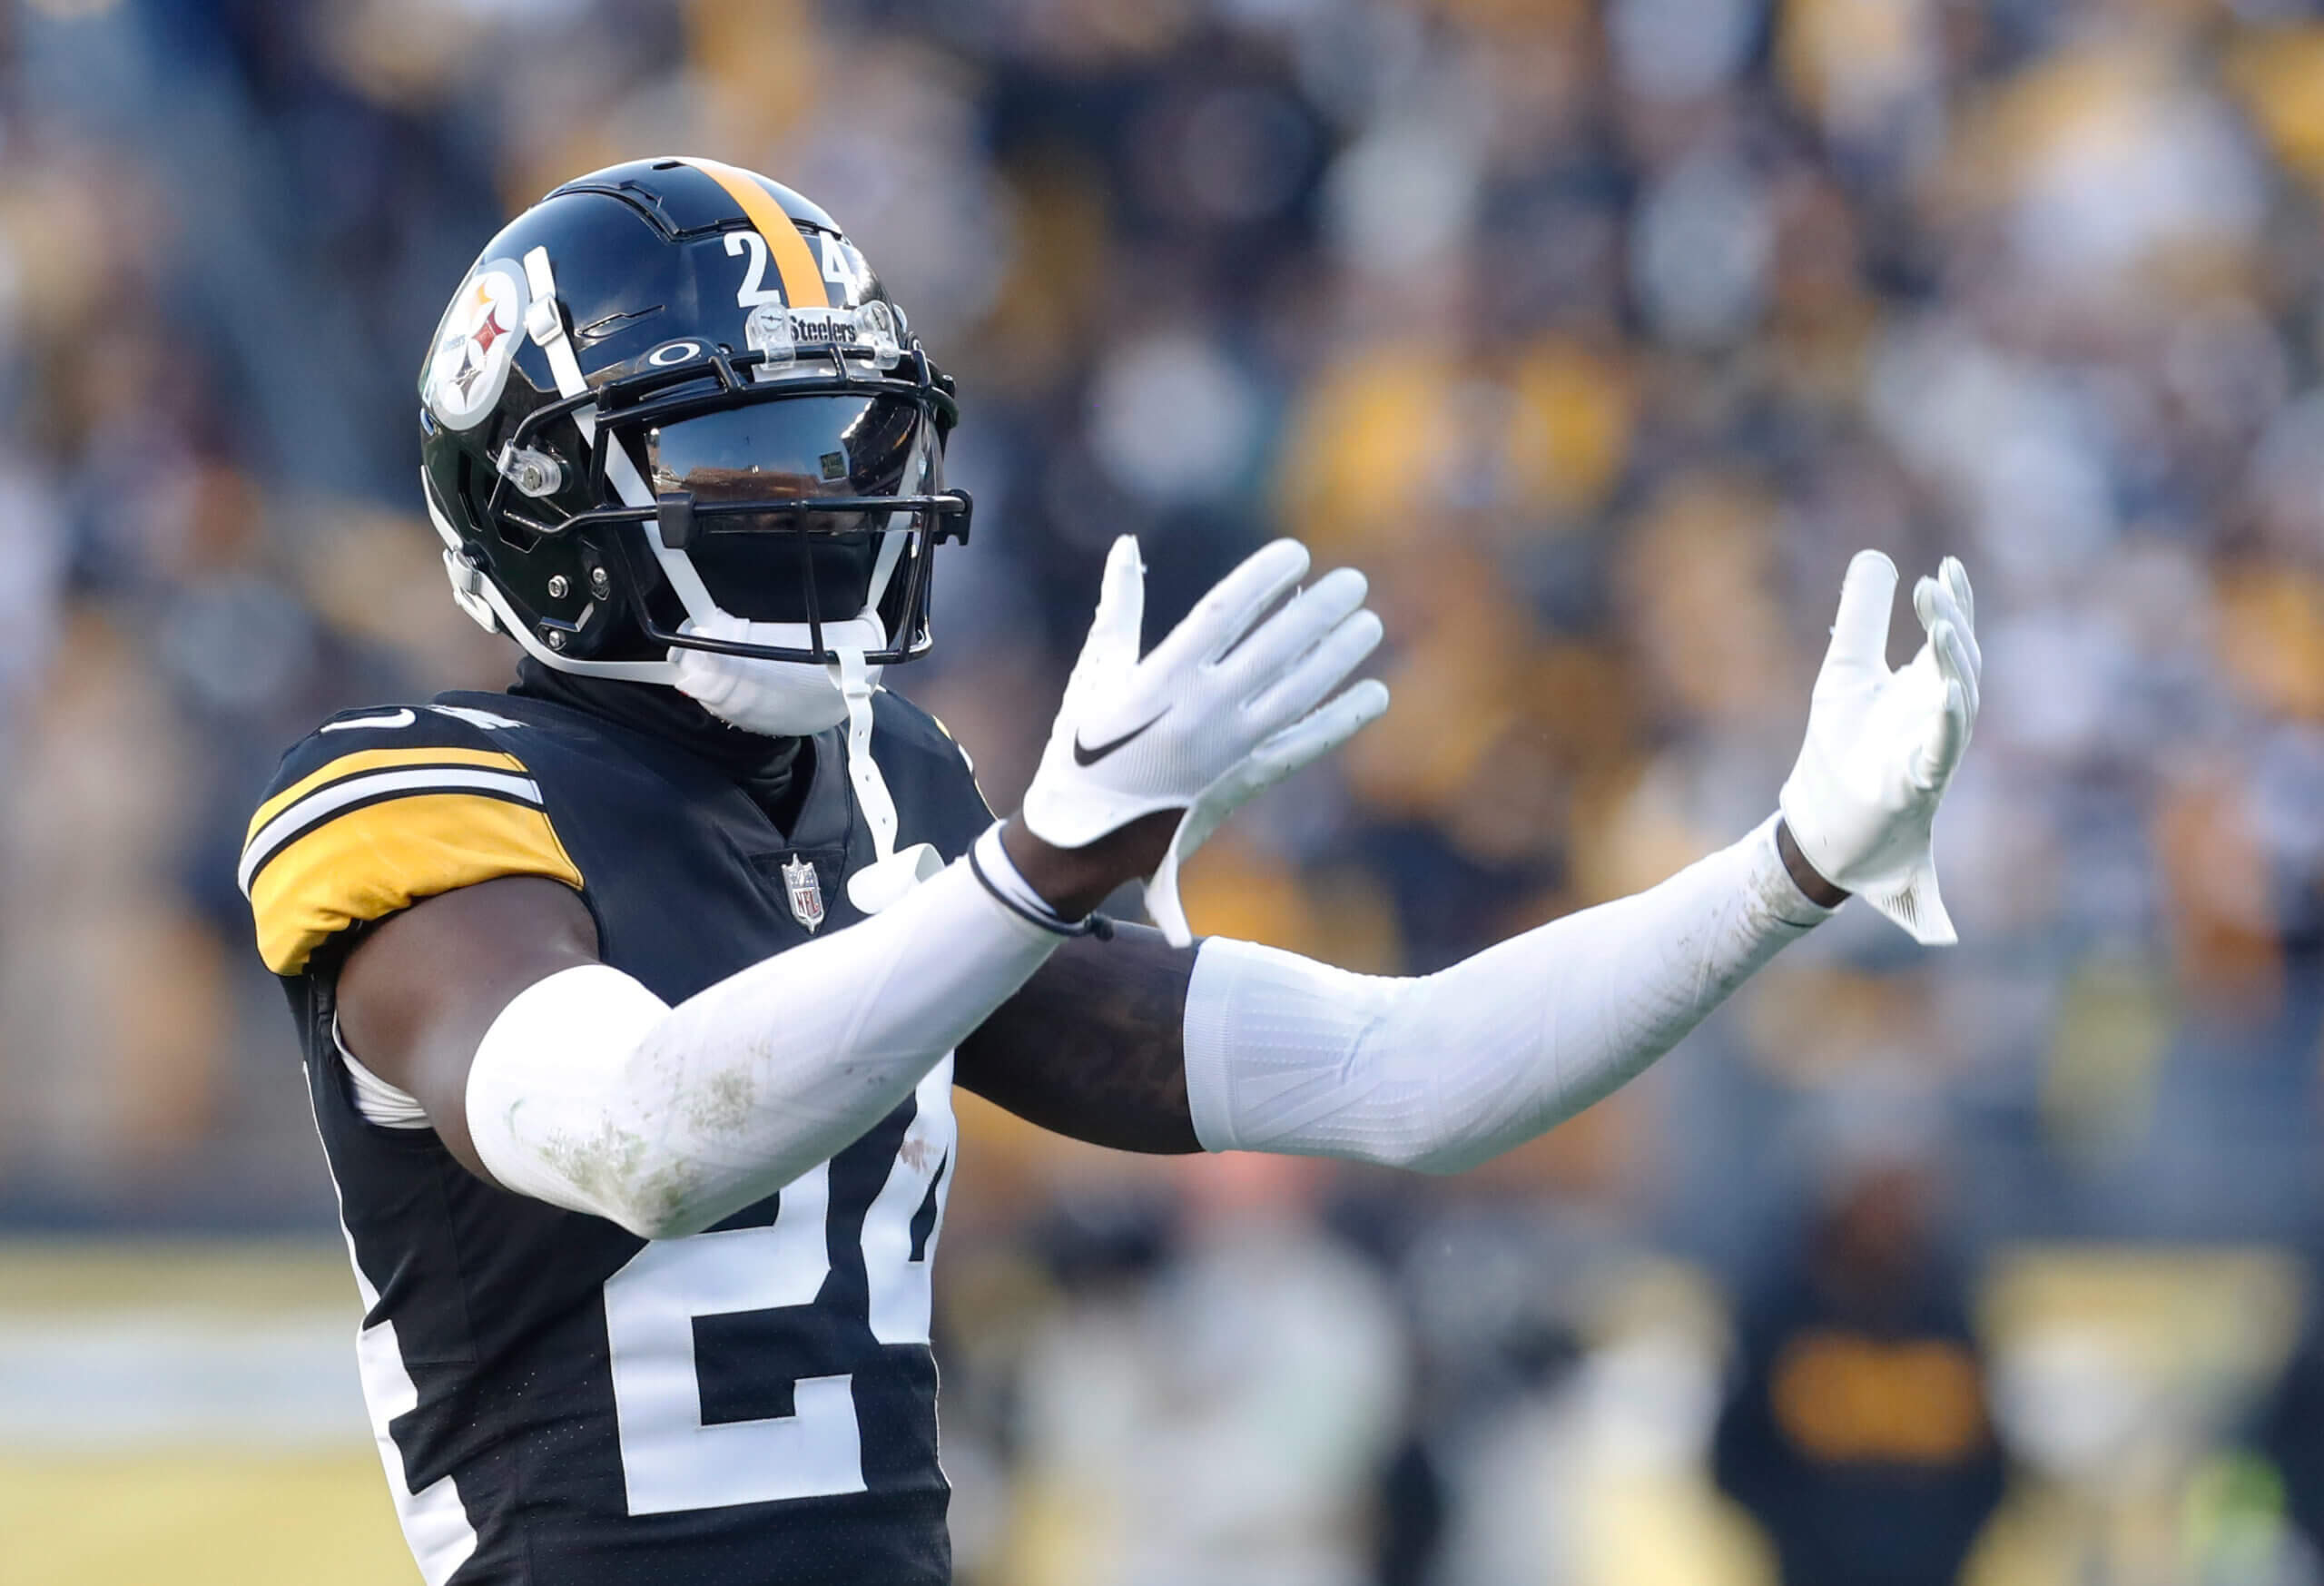 Steelers' Joey Porter Jr. says he's NFL's top CB: 'Nobody was doing what I was doing'